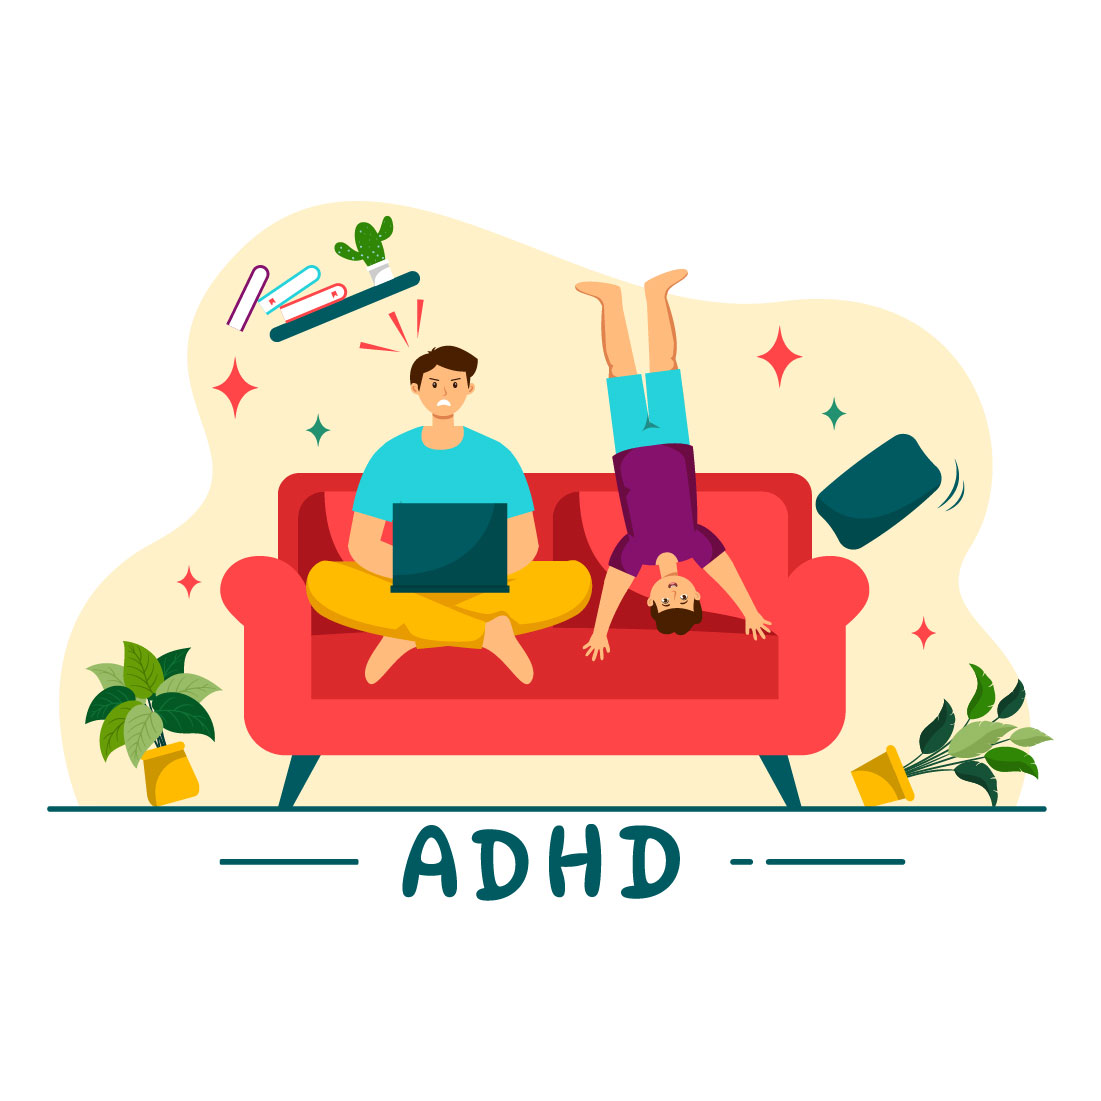 12 ADHD or Attention Deficit Hyperactivity Disorder Illustration preview image.